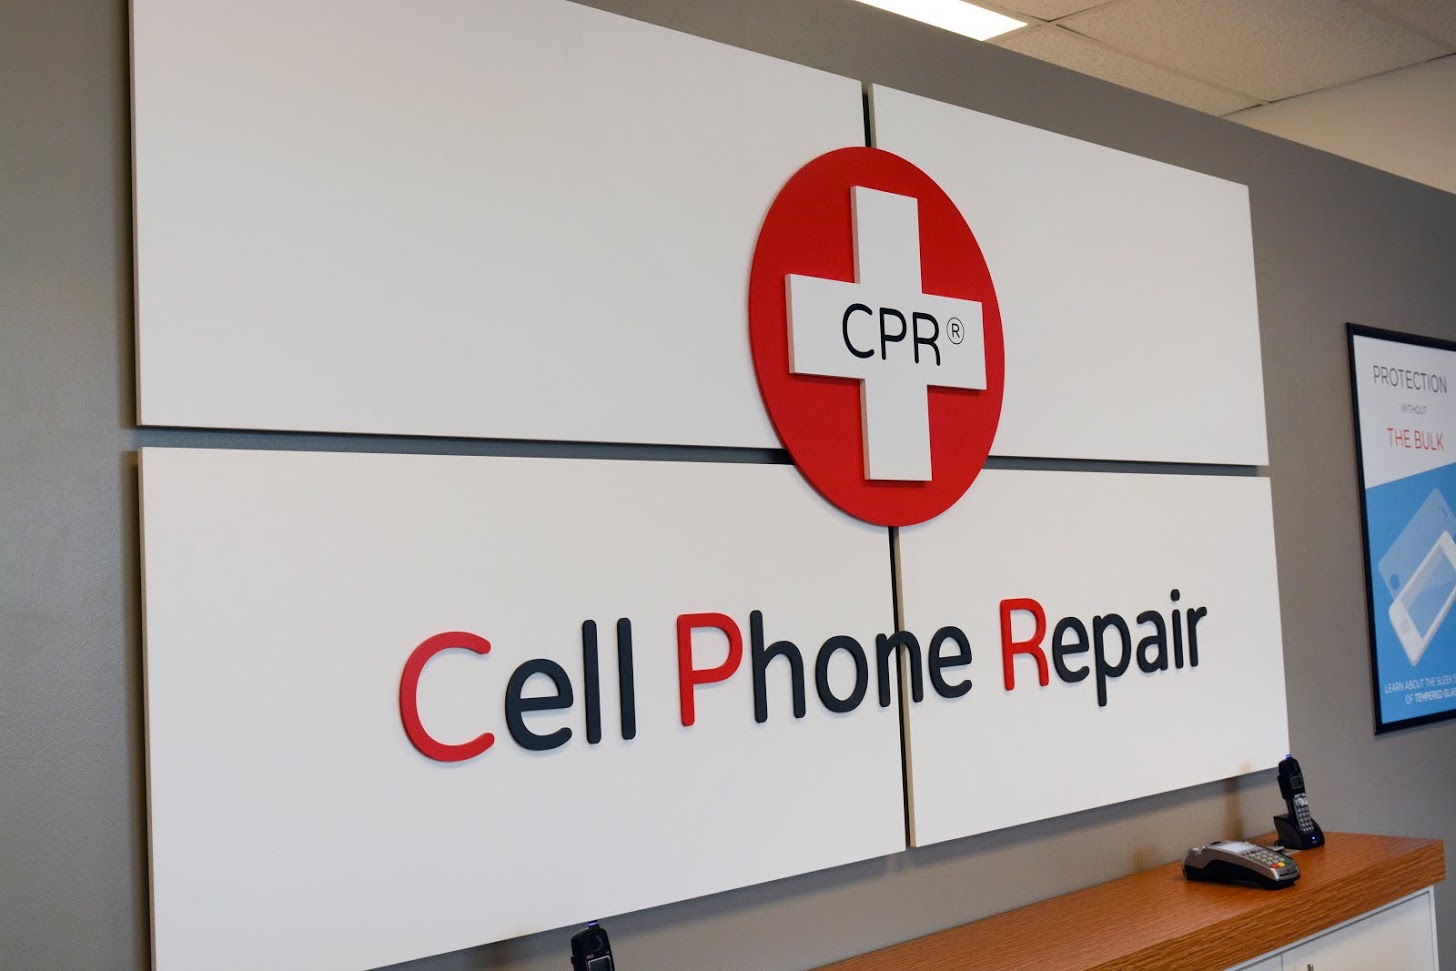 CPR Cell Phone Repair, Thursday, March 14, 2019, Press release picture